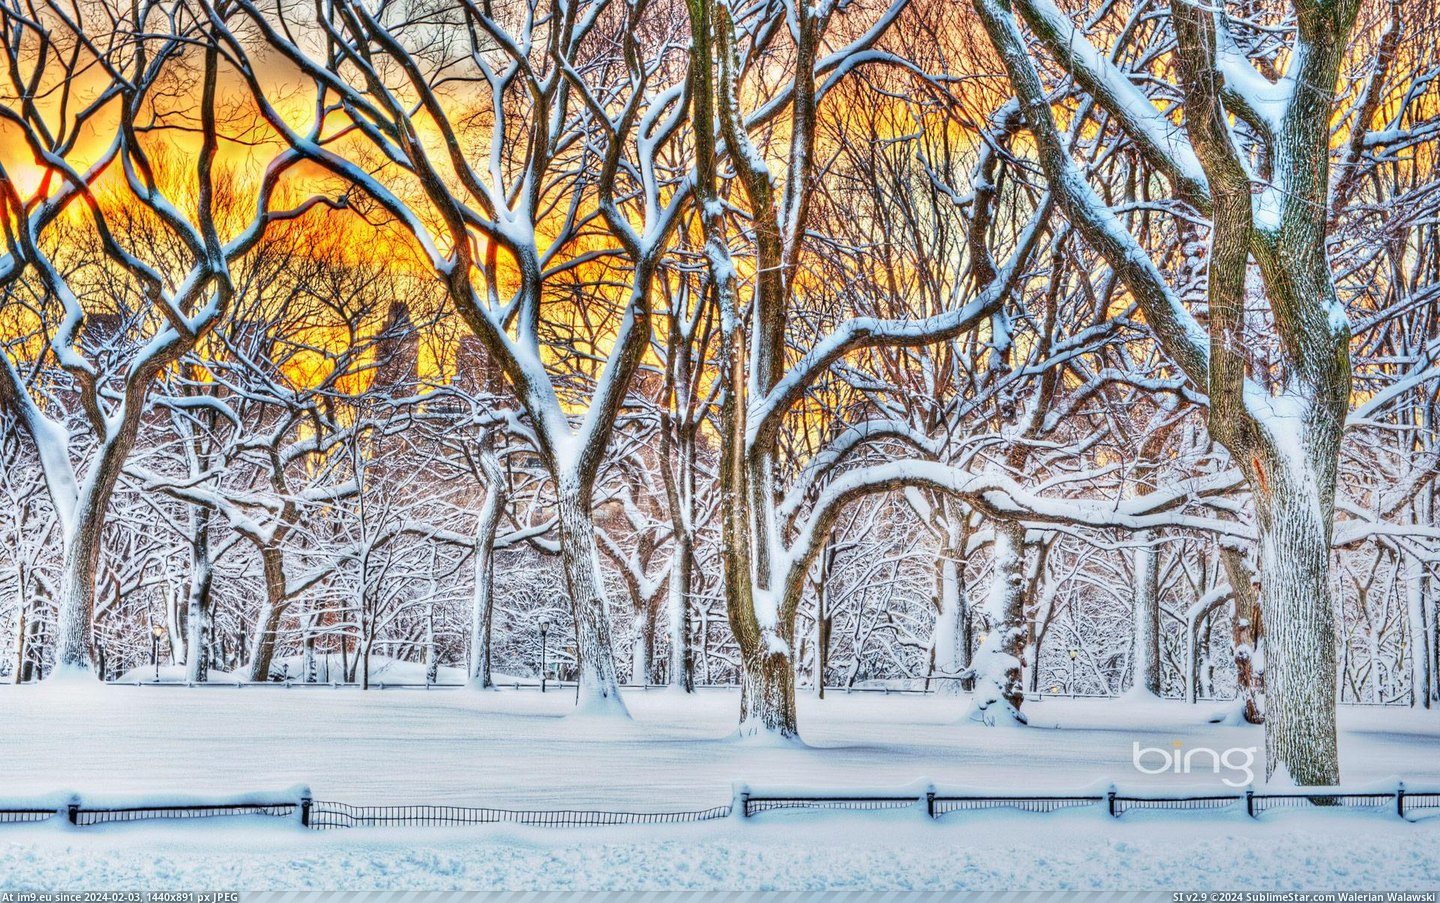 Sunrise in Central Park after a snowstorm in New York City, New York (©Getty Images) (in December 2012 HD Wallpapers)